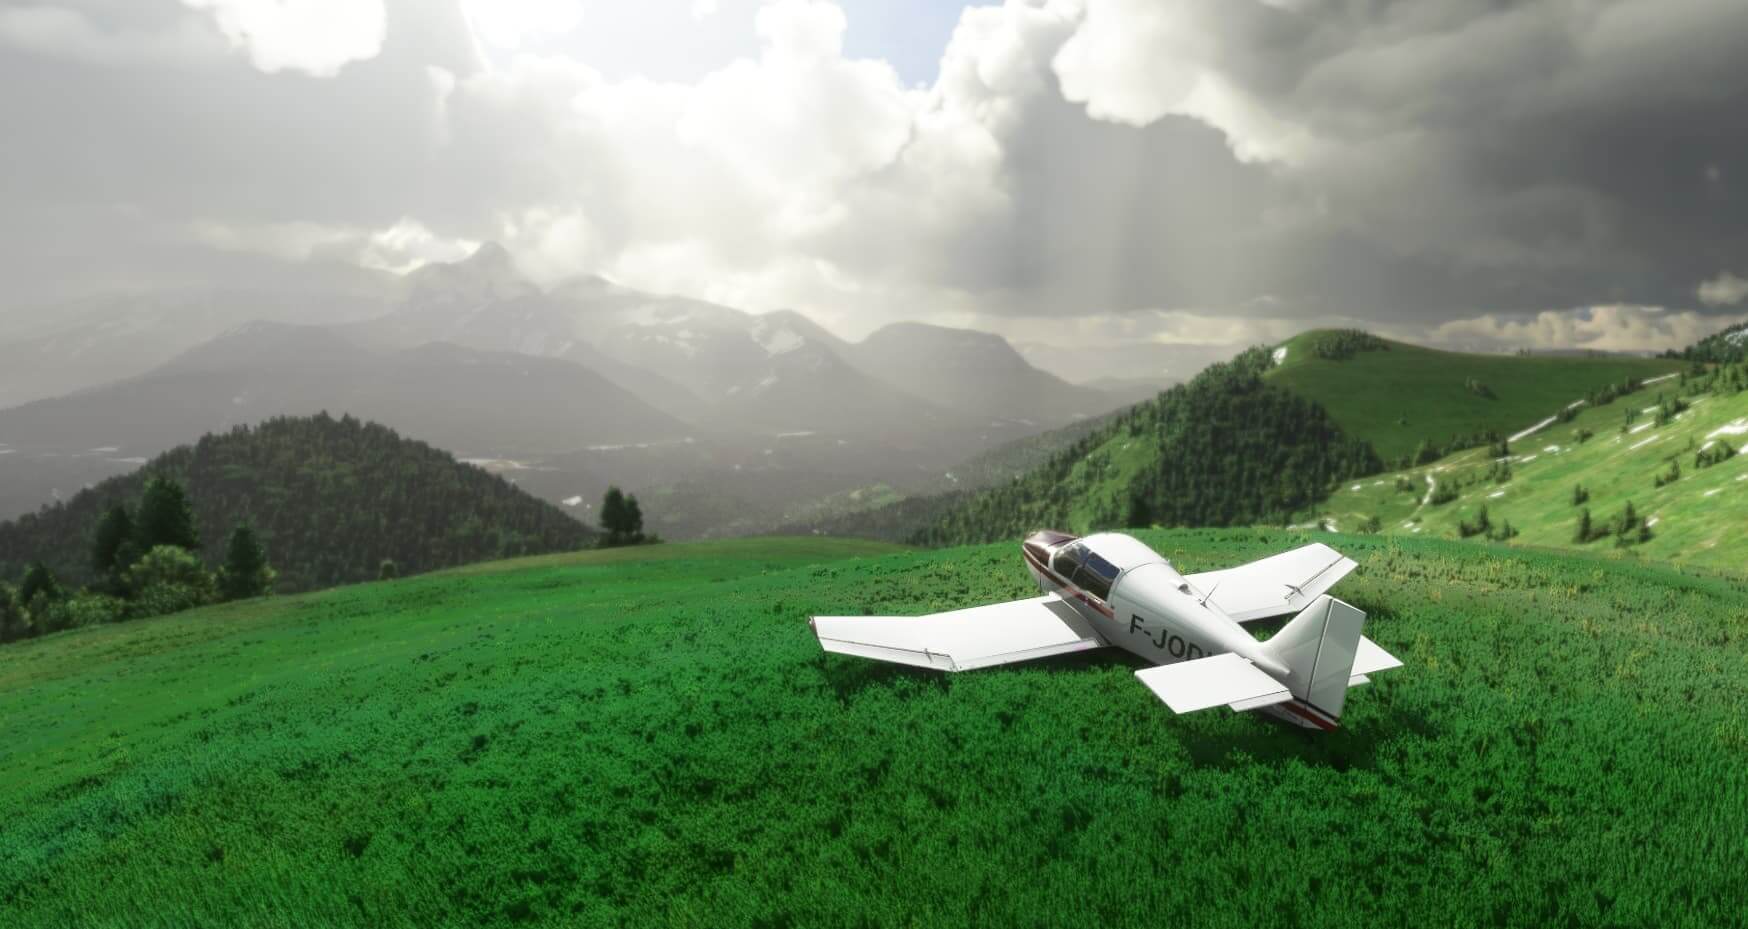 Small aircraft standing on top of a grassy hill overlooking the mountains